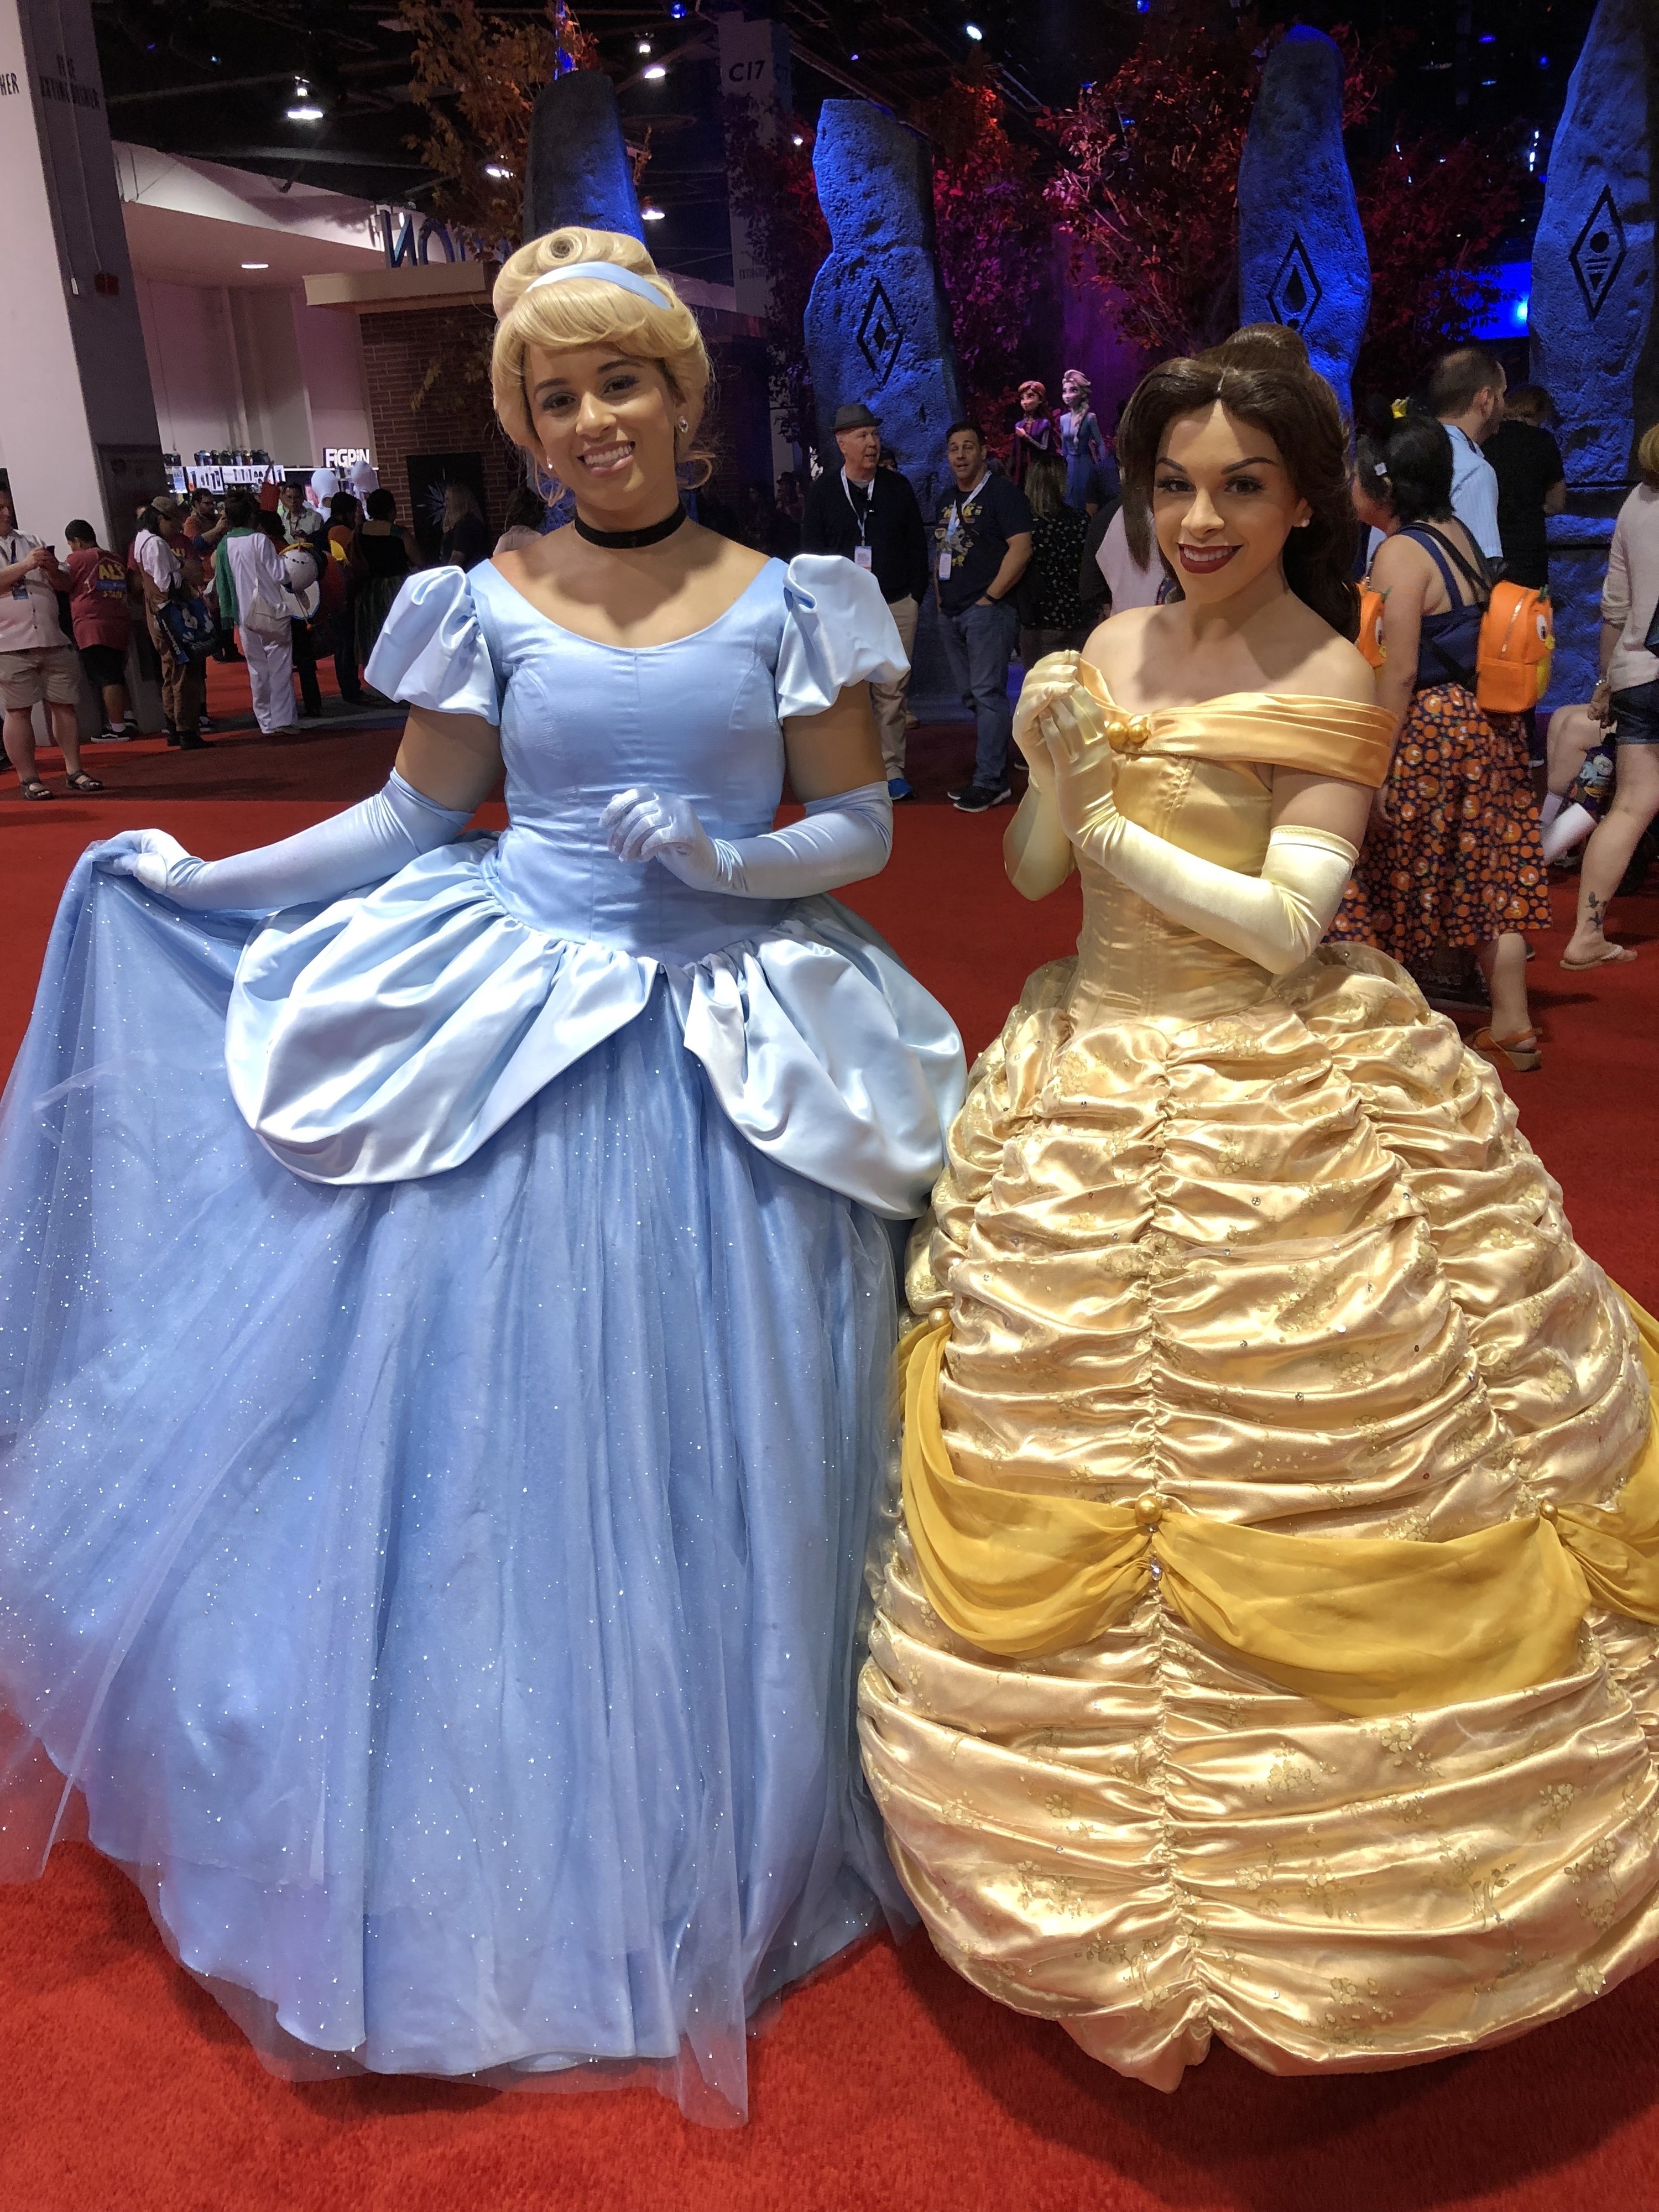 The World's Foremost Disney Cosplay Expert Weighs in on Fashion's Princess  Moment - Fashionista